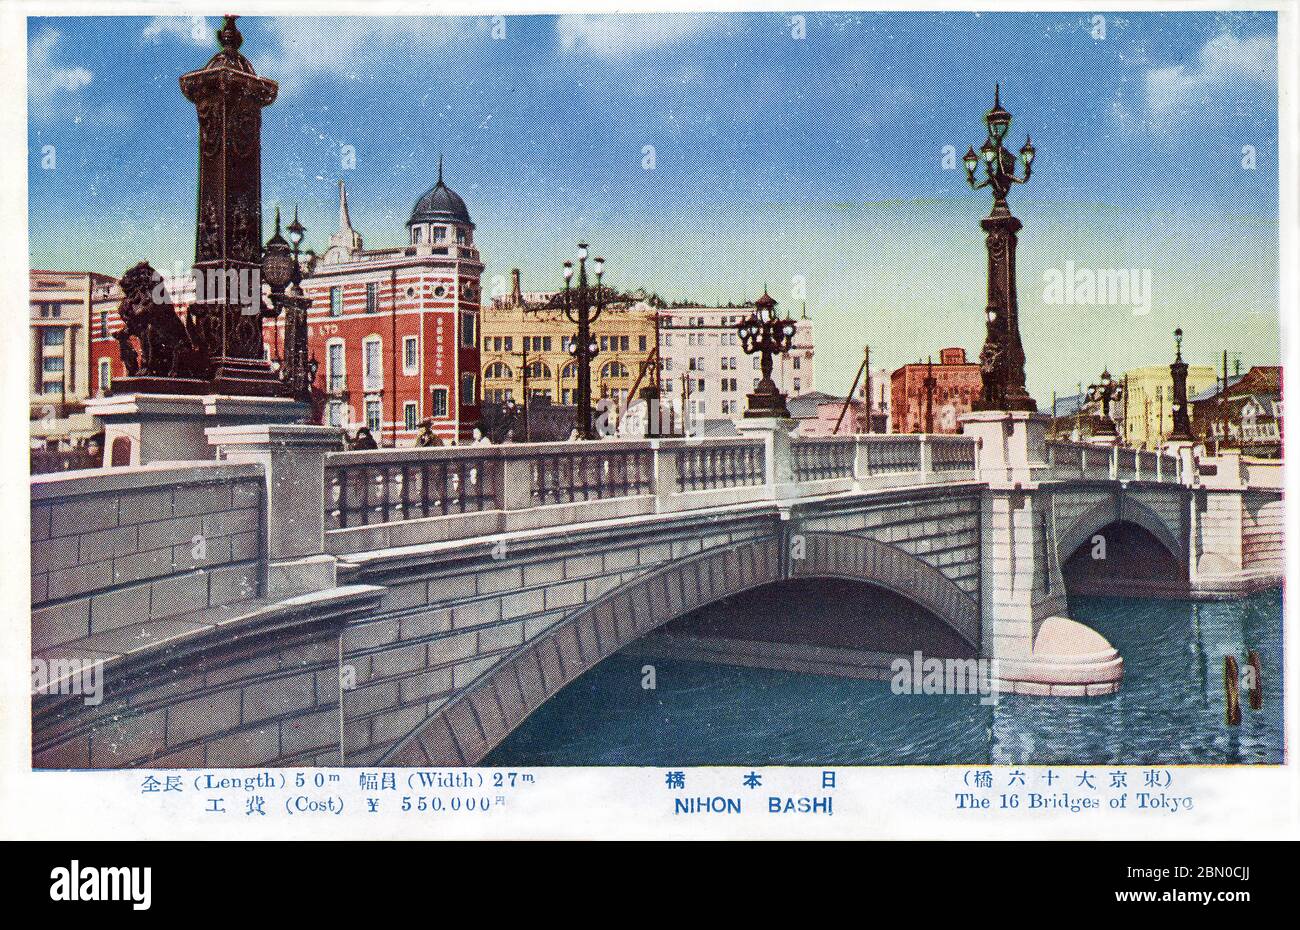 [ 1930s Japan - Nihonbashi Bridge, Tokyo ] —   Nihonbashi Bridge in Tokyo, designed by Yorinaka Tsumaki (妻木頼黄, 1859-1916), ca. 1930.  The stone bridge with bronze lions and wrought-iron gas lamps replaced the wooden one in 1911 (Meiji 44). Now hidden below an ugly highway, it is one of only two surviving Meiji-era bridges in Tokyo.  From the postcard series The 16 Bridges of Tokyo (東京大十六橋), apparently published to coincide with the celebration of the official completion of Tokyo’s earthquake reconstruction in March 1930.  20th century vintage postcard. Stock Photo